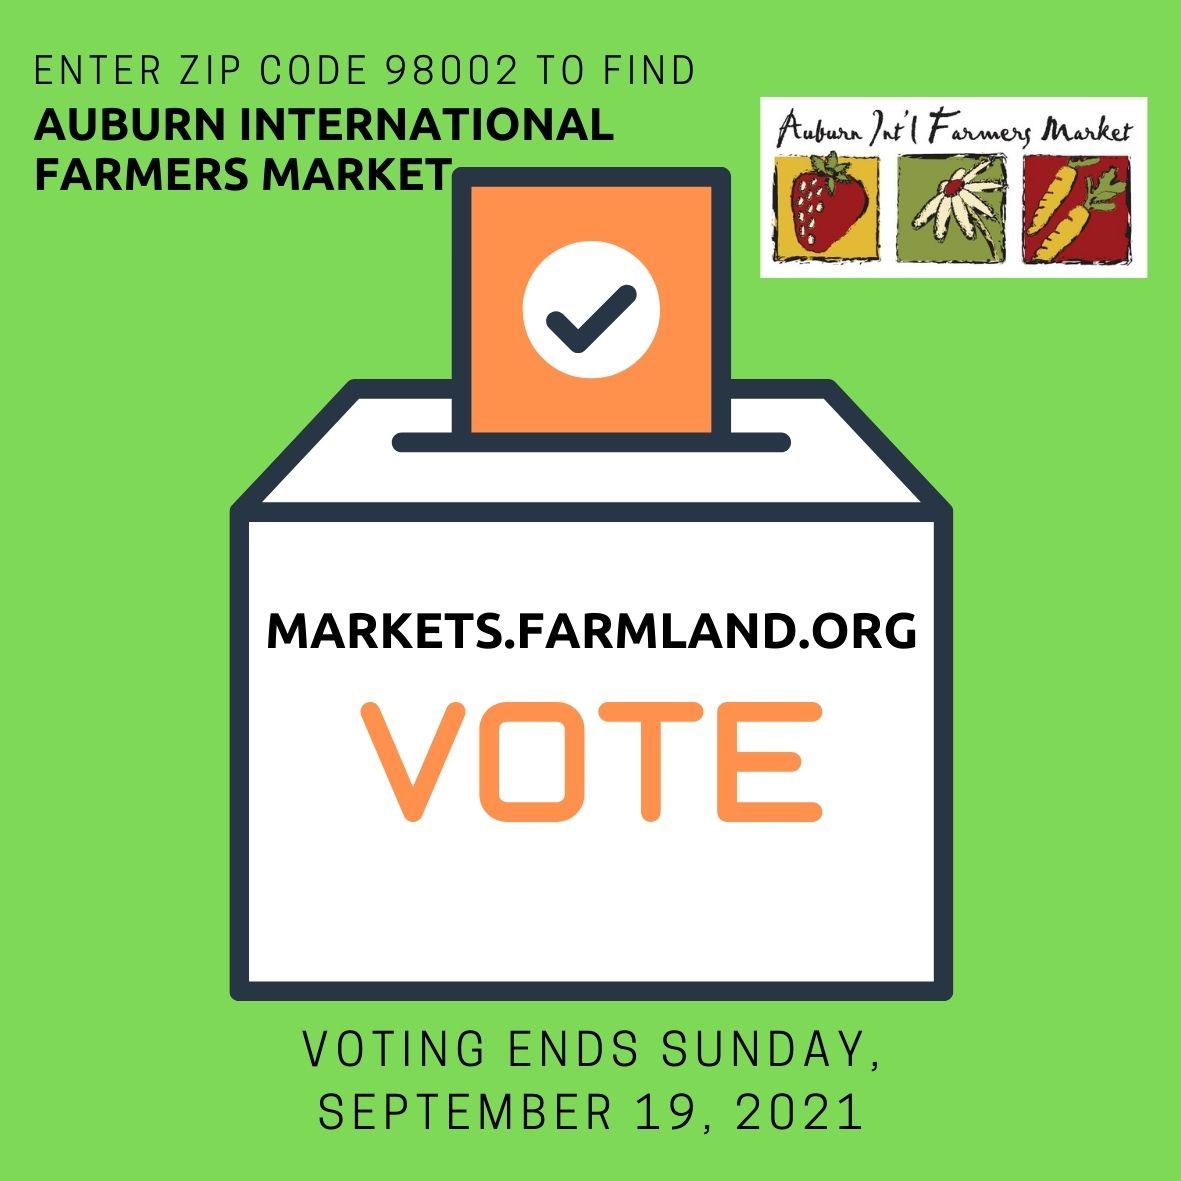 a graphic promoting voting for the auburn farmers market in the 13th annual America’s Farmers Market Celebration